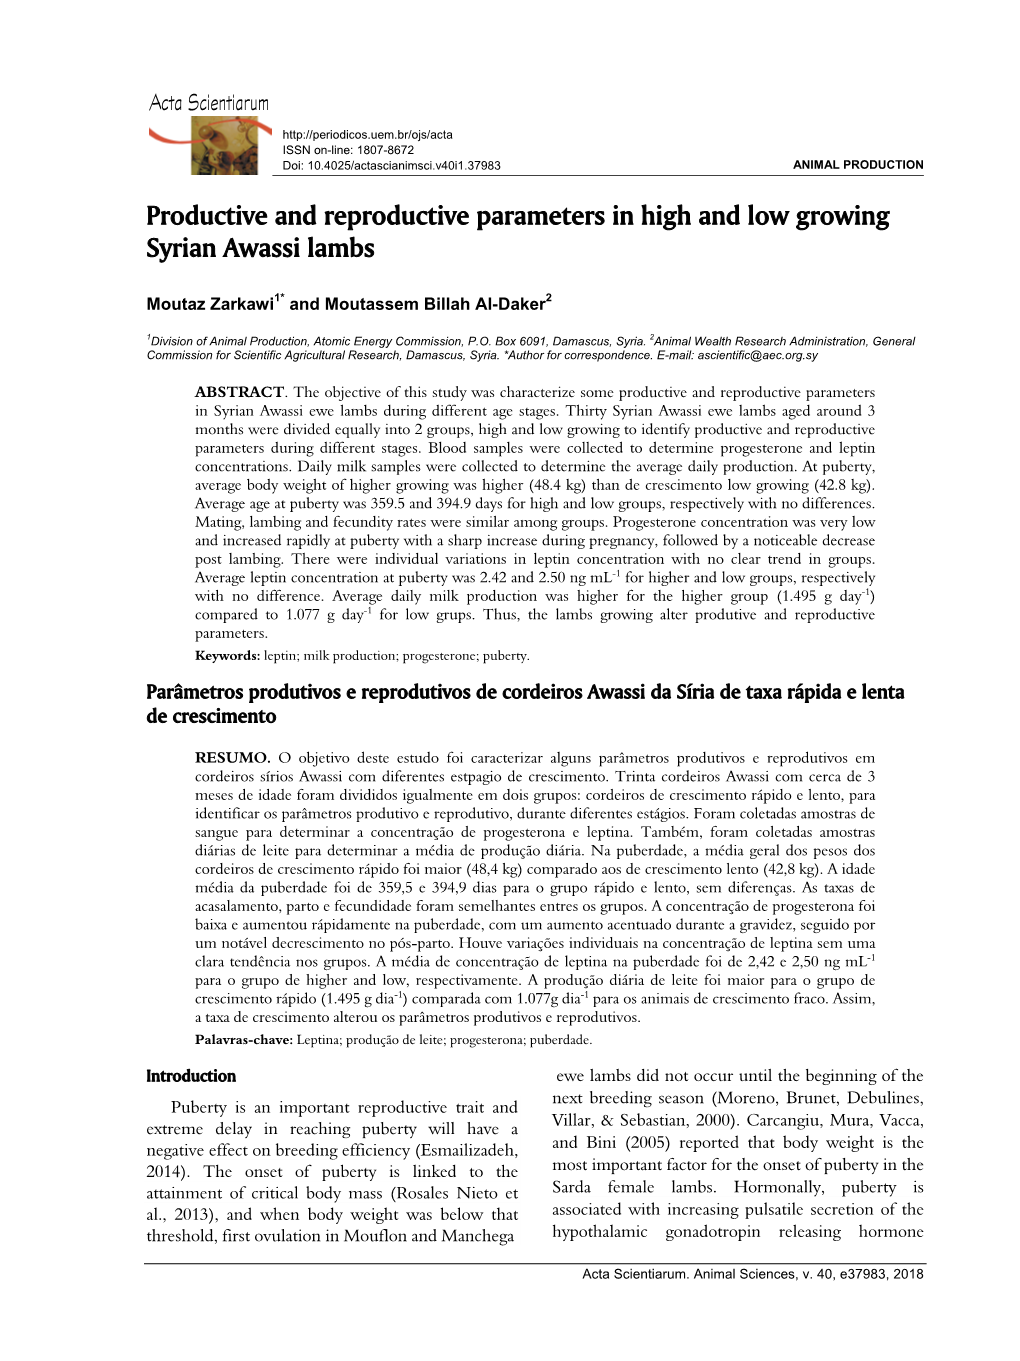 Productive and Reproductive Parameters in High and Low Growing Syrian Awassi Lambs